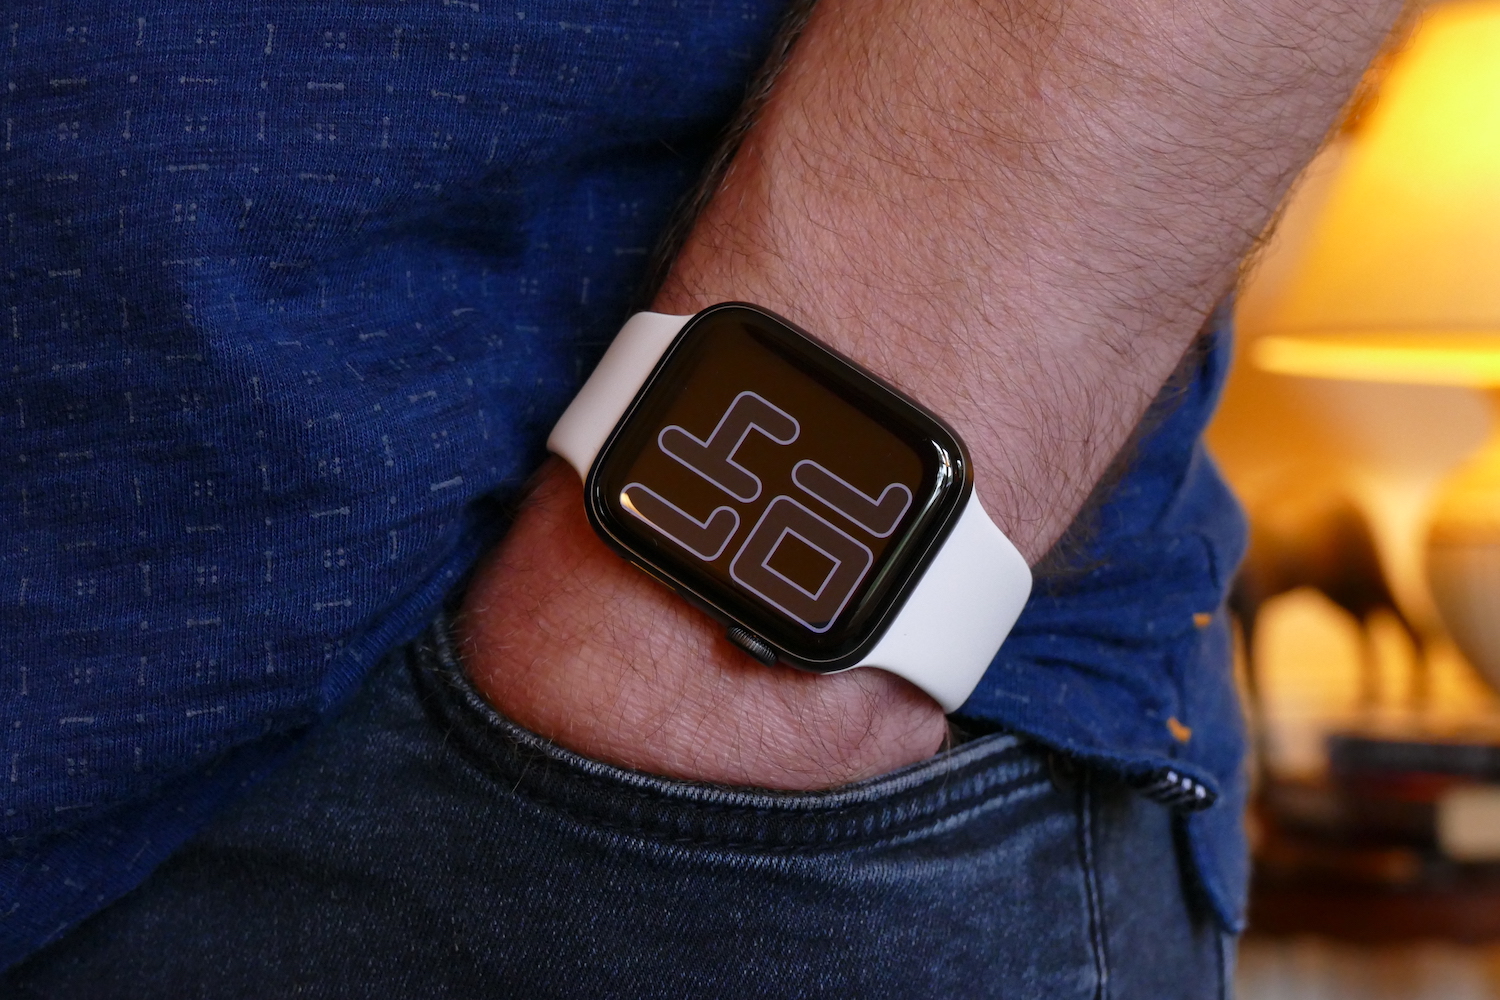 Someone wearing an Apple Watch Series 5 on their wrist.